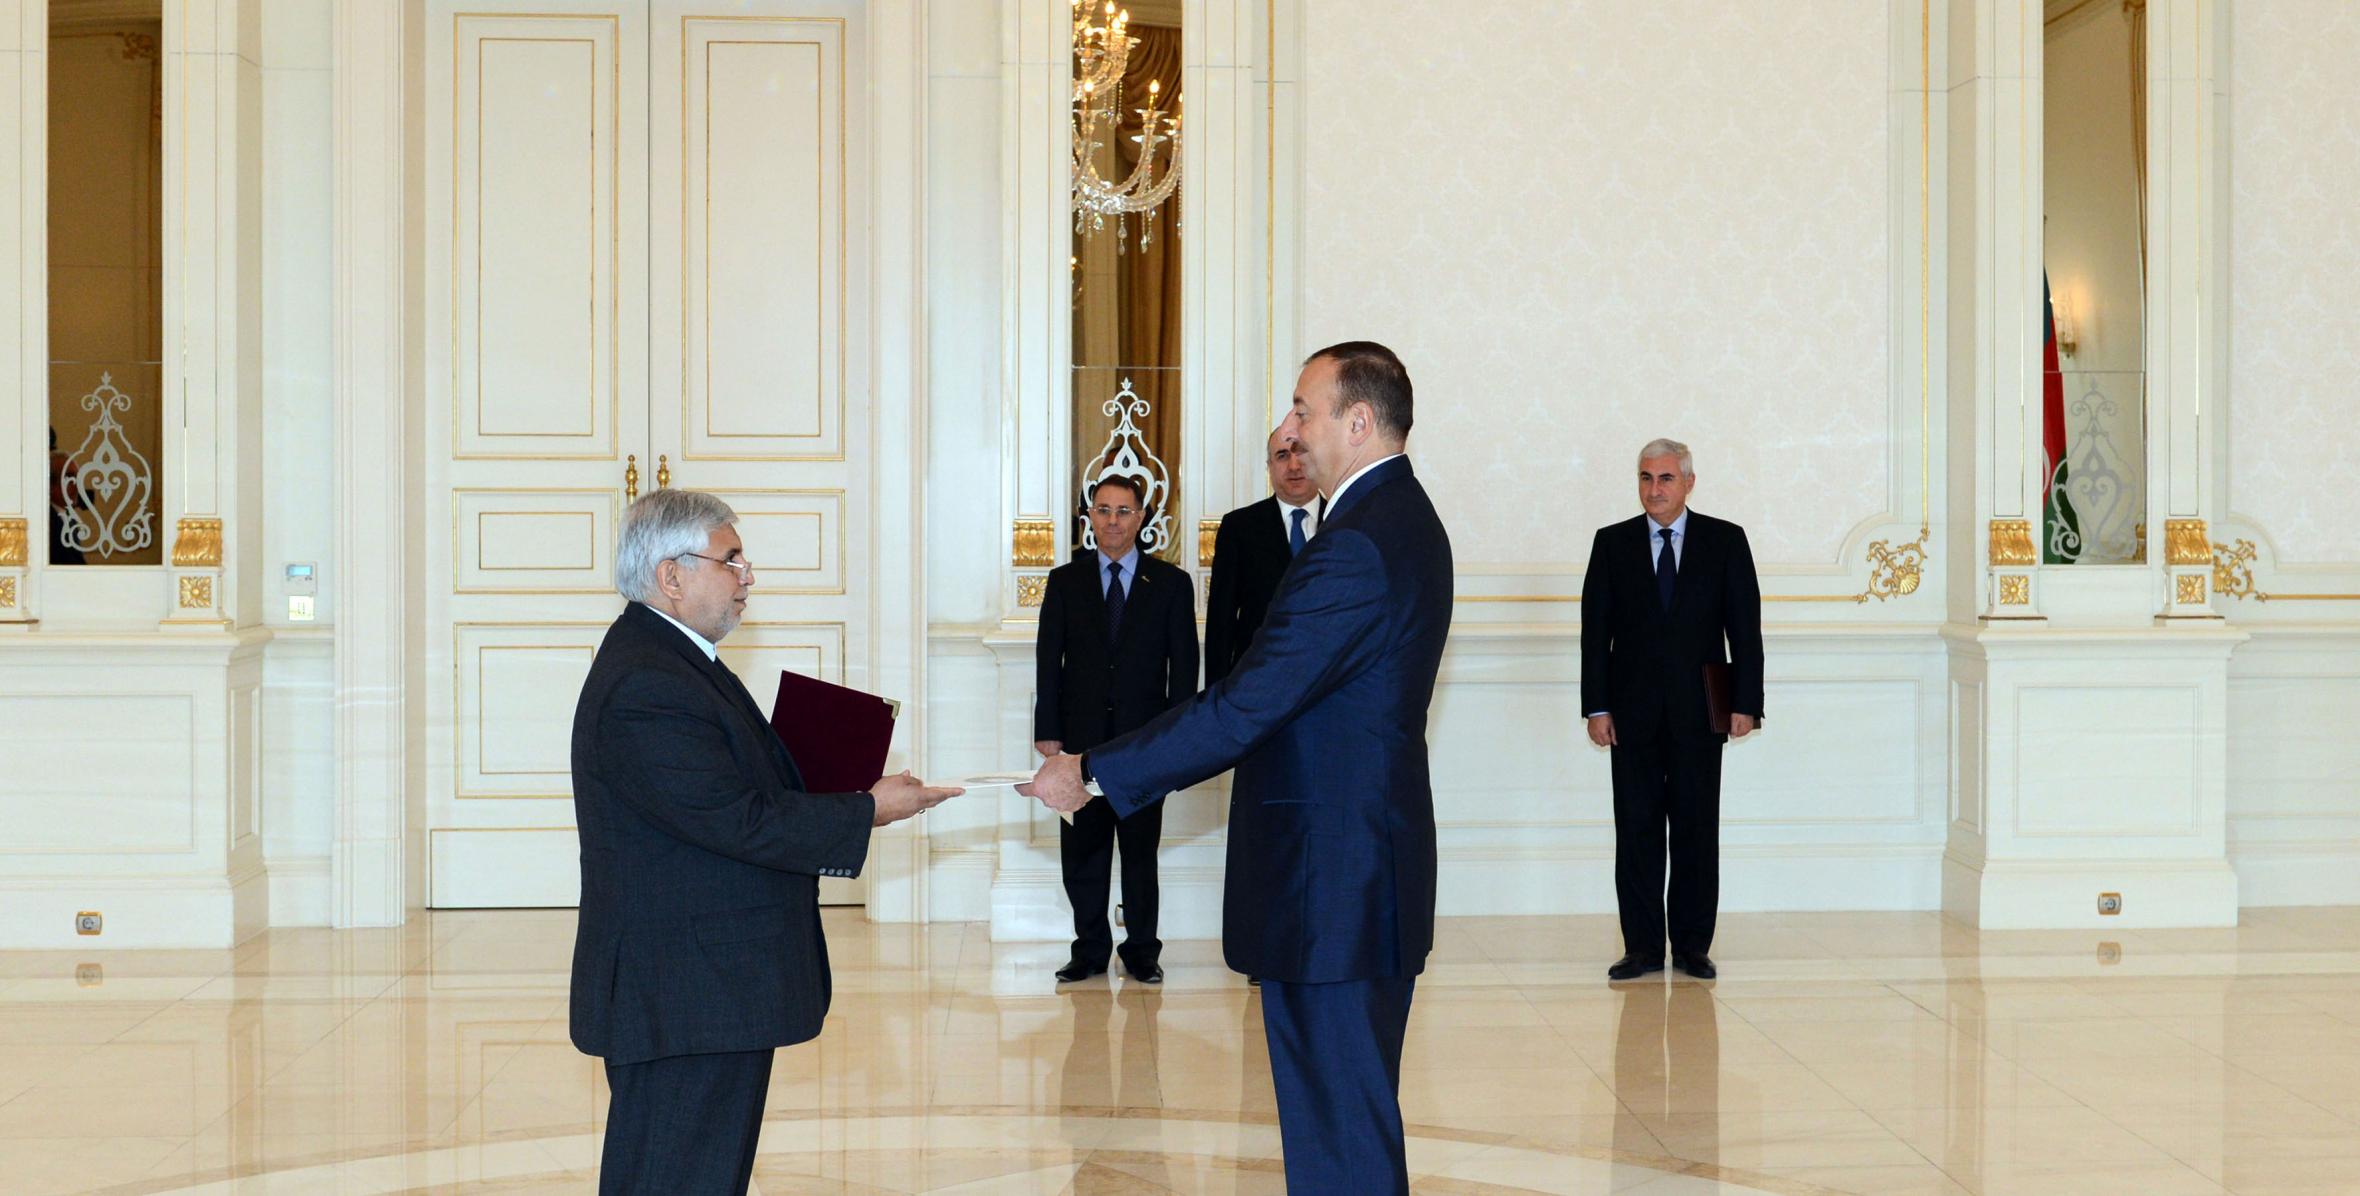 Ilham Aliyev accepted the credentials of a newly-appointed Ambassador Extraordinary and Plenipotentiary of the Islamic Republic of Iran to Azerbaijan